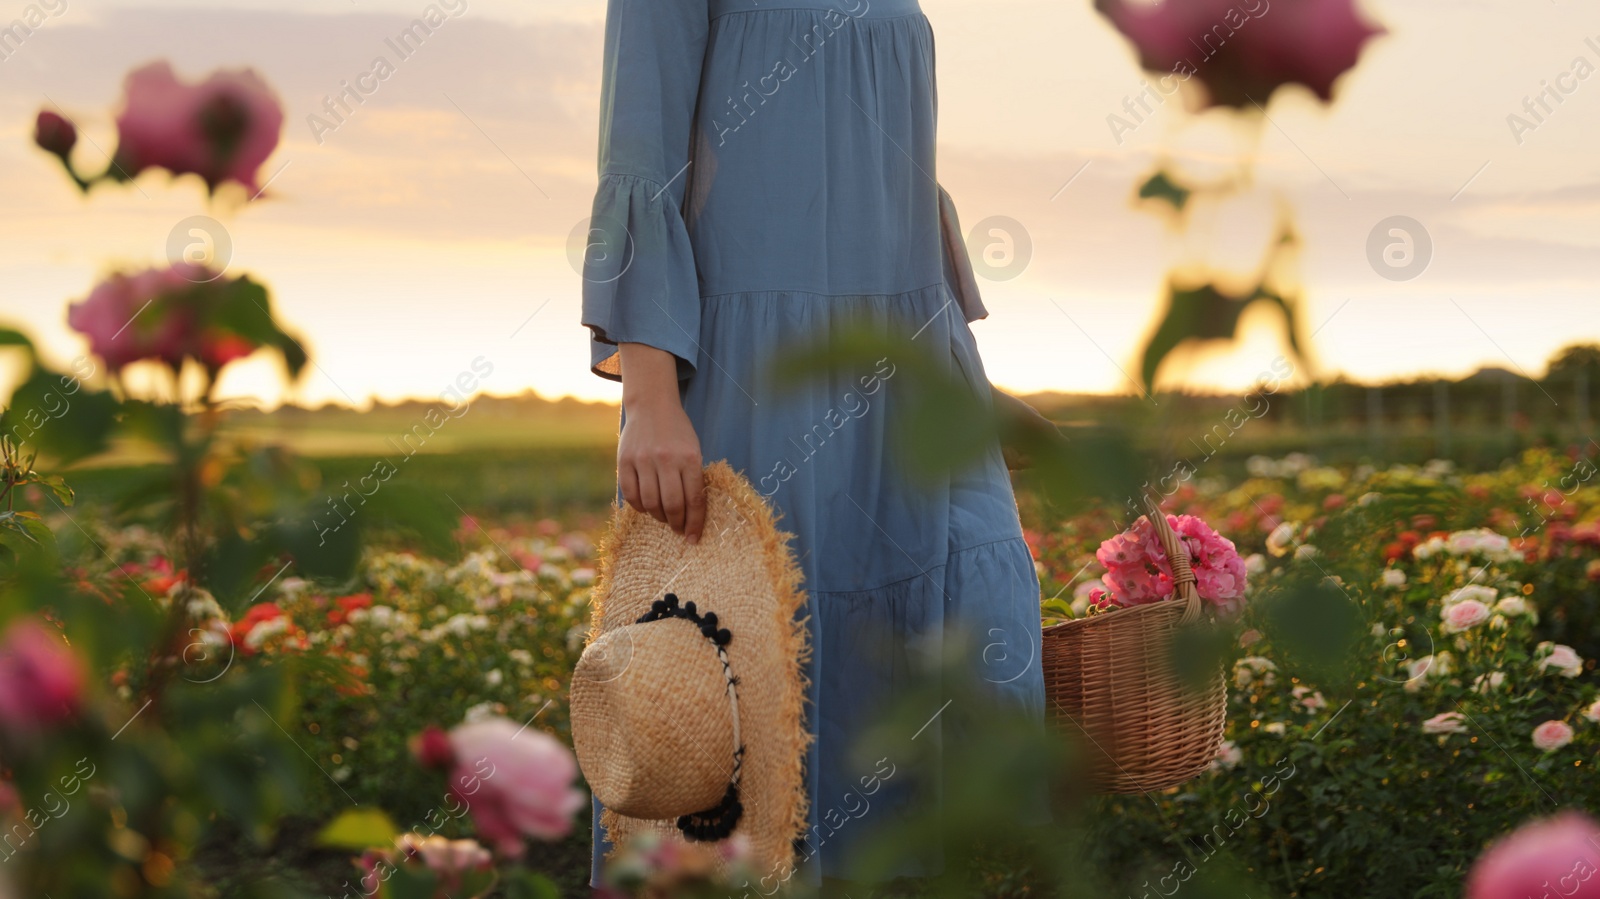 Photo of Woman with basket of roses in beautiful blooming field, closeup